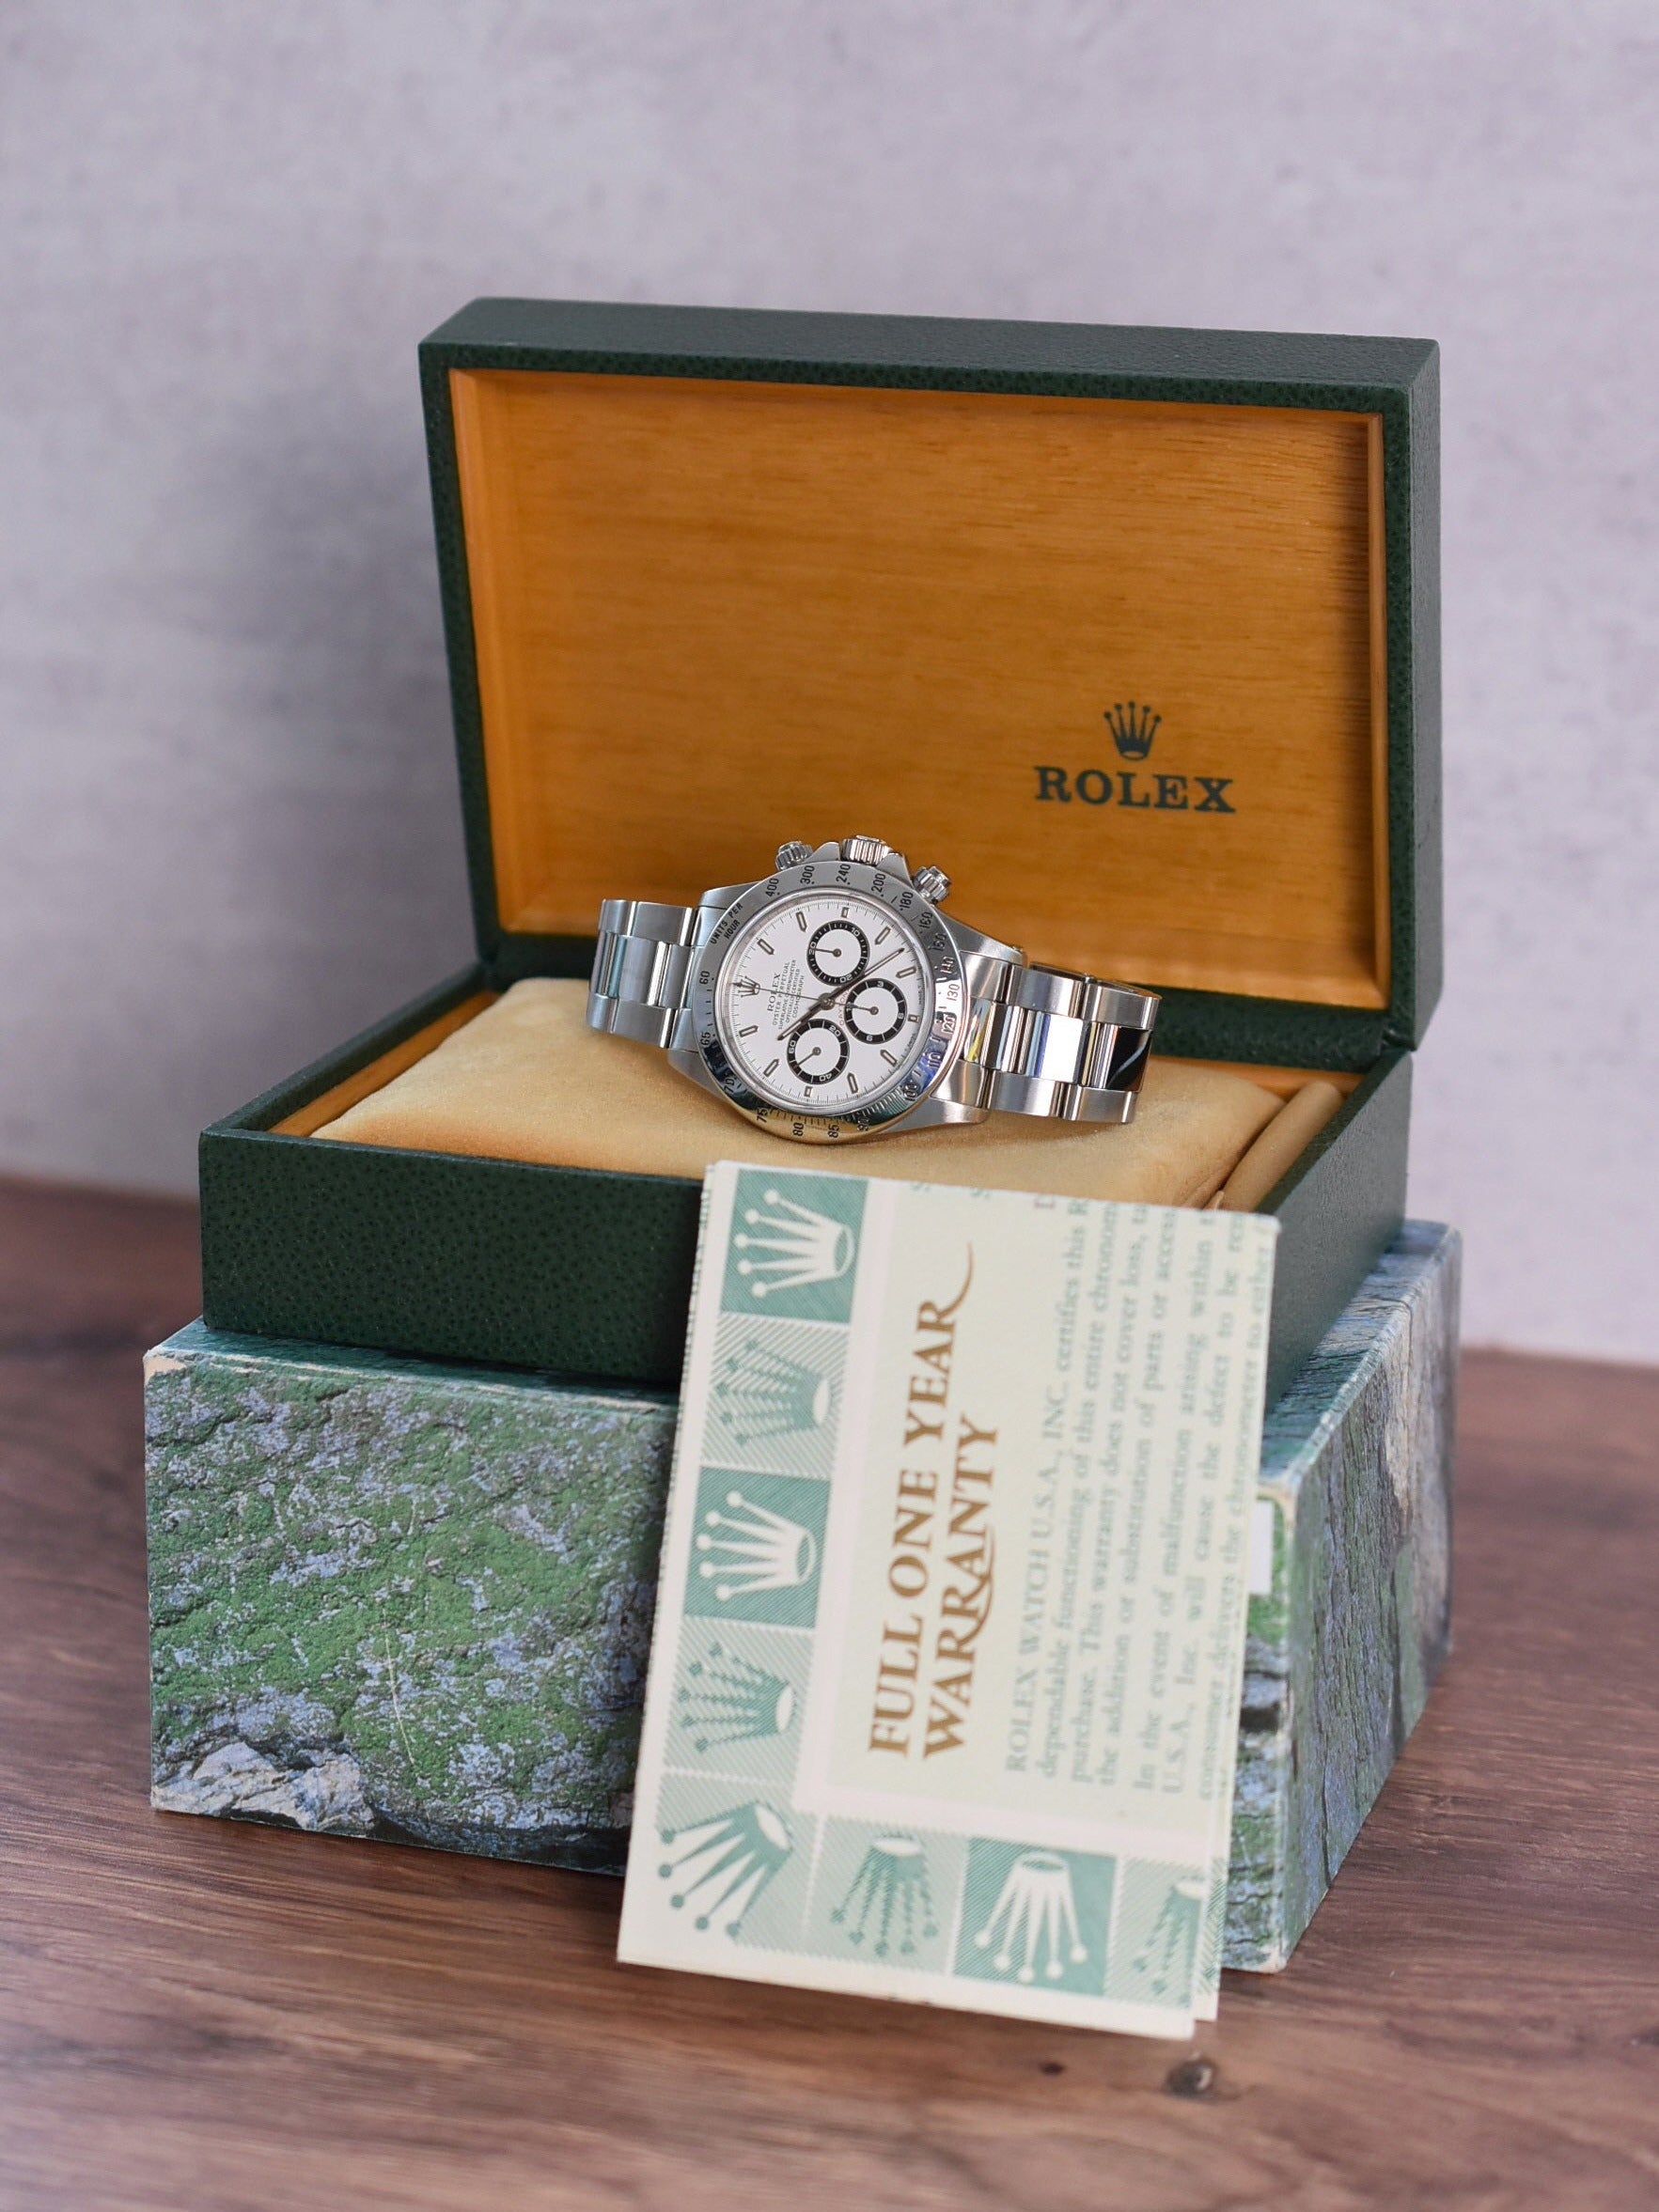 37965: Rolex Daytona, Ref. 16520, Circa 1997 with Box and Papers